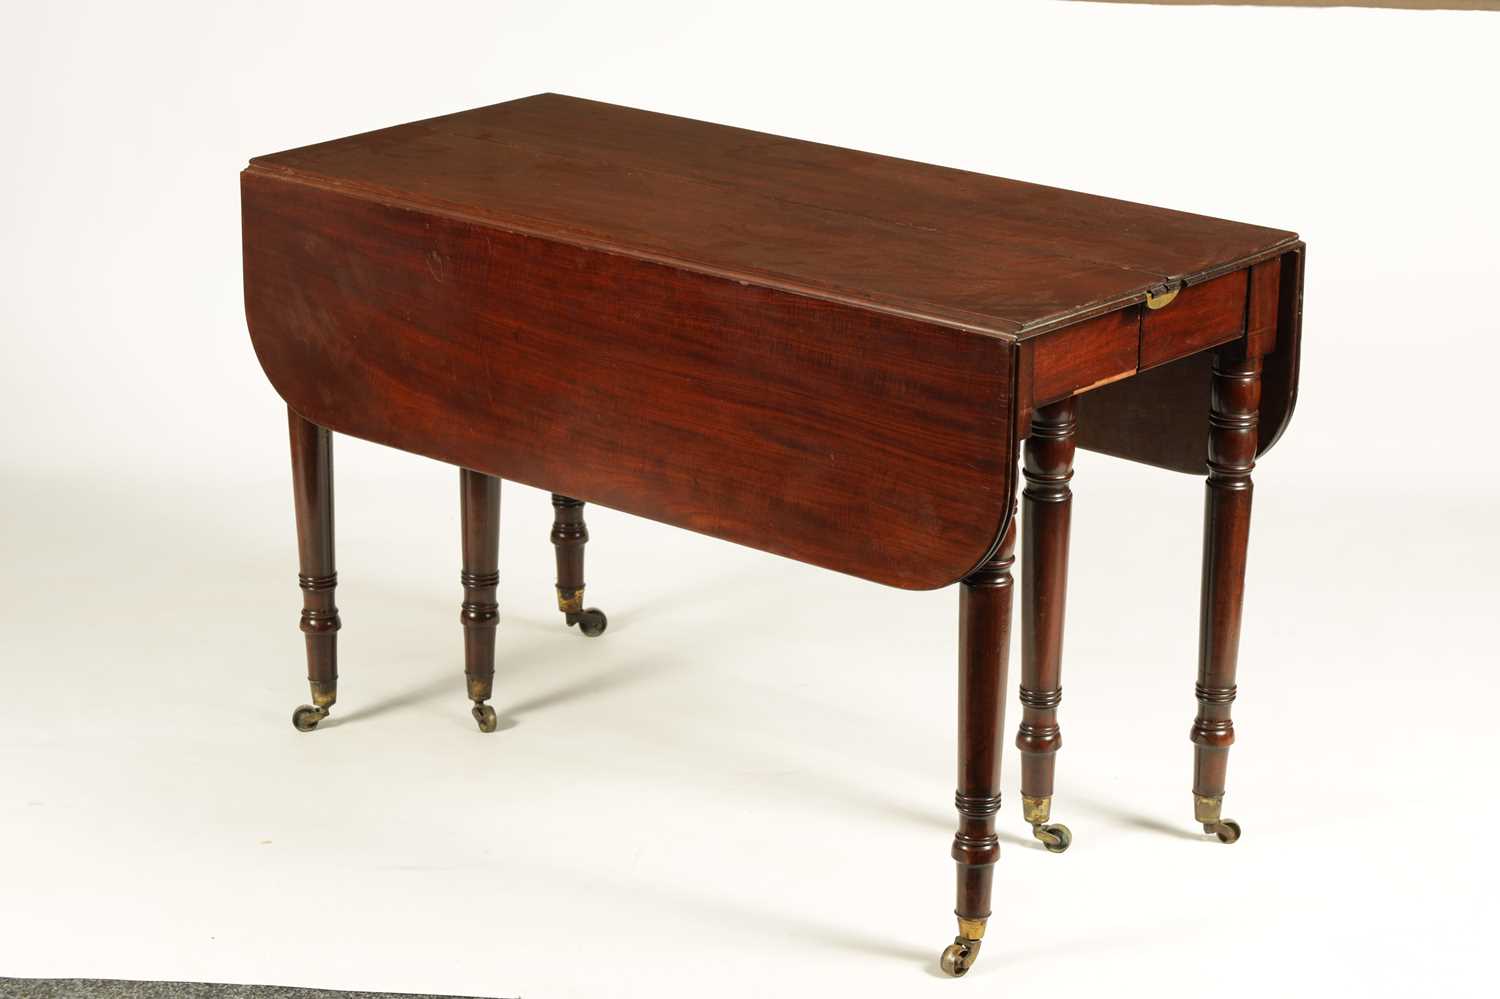 ROSS DUBLIN A GEORGE III FIGURED MAHOGANY SCISSOR ACTION EXTENDING DINING TABLE - Image 8 of 8